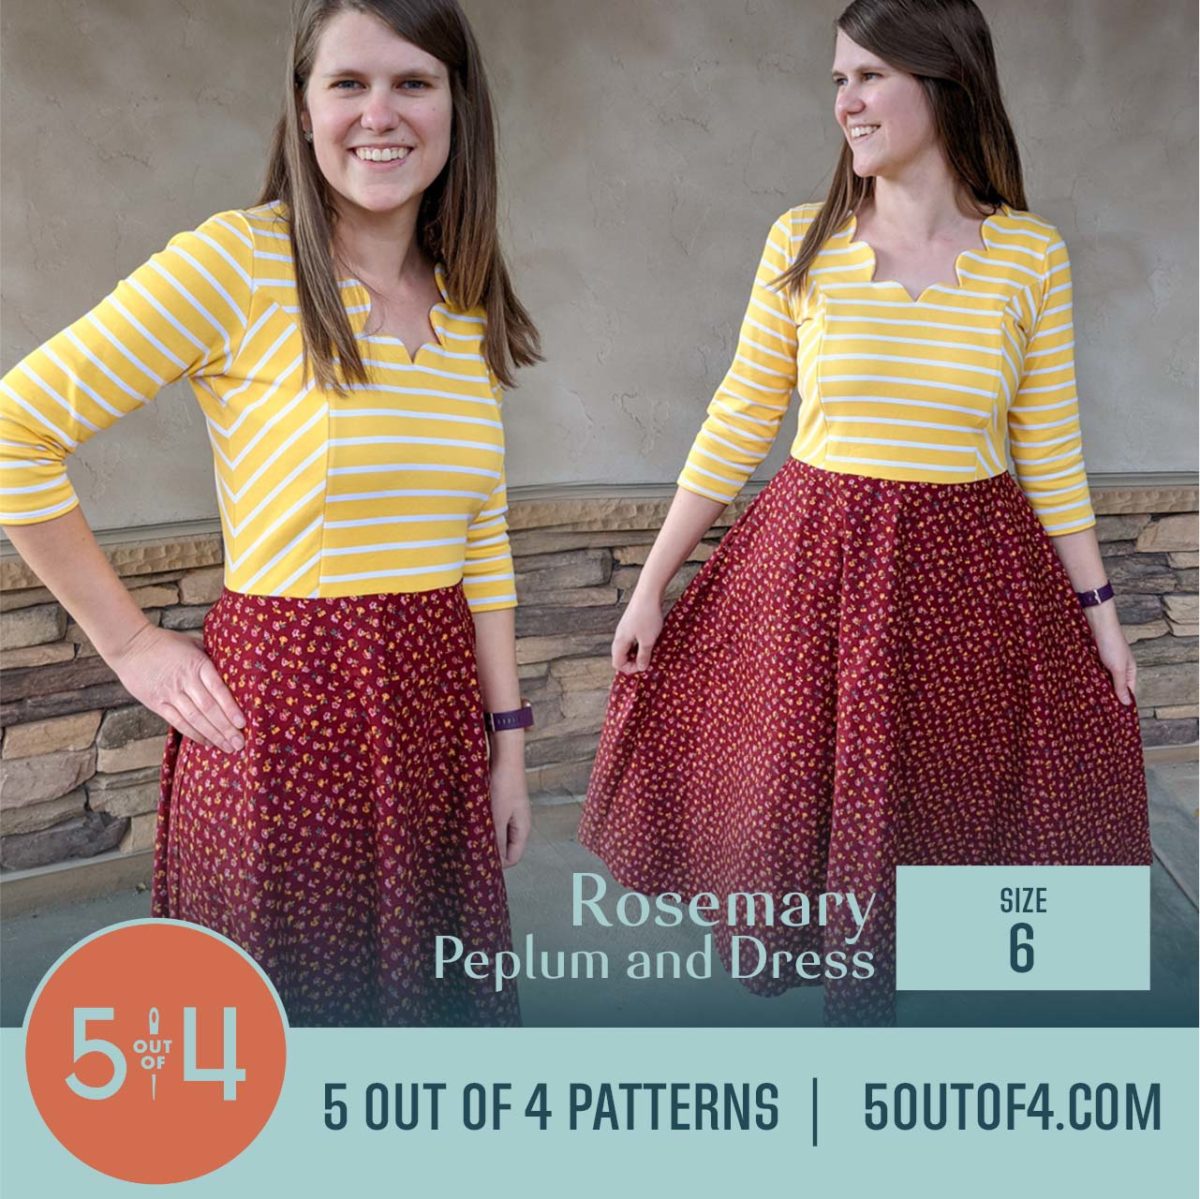 Rosemary Peplum and Dress - 5 out of 4 Patterns